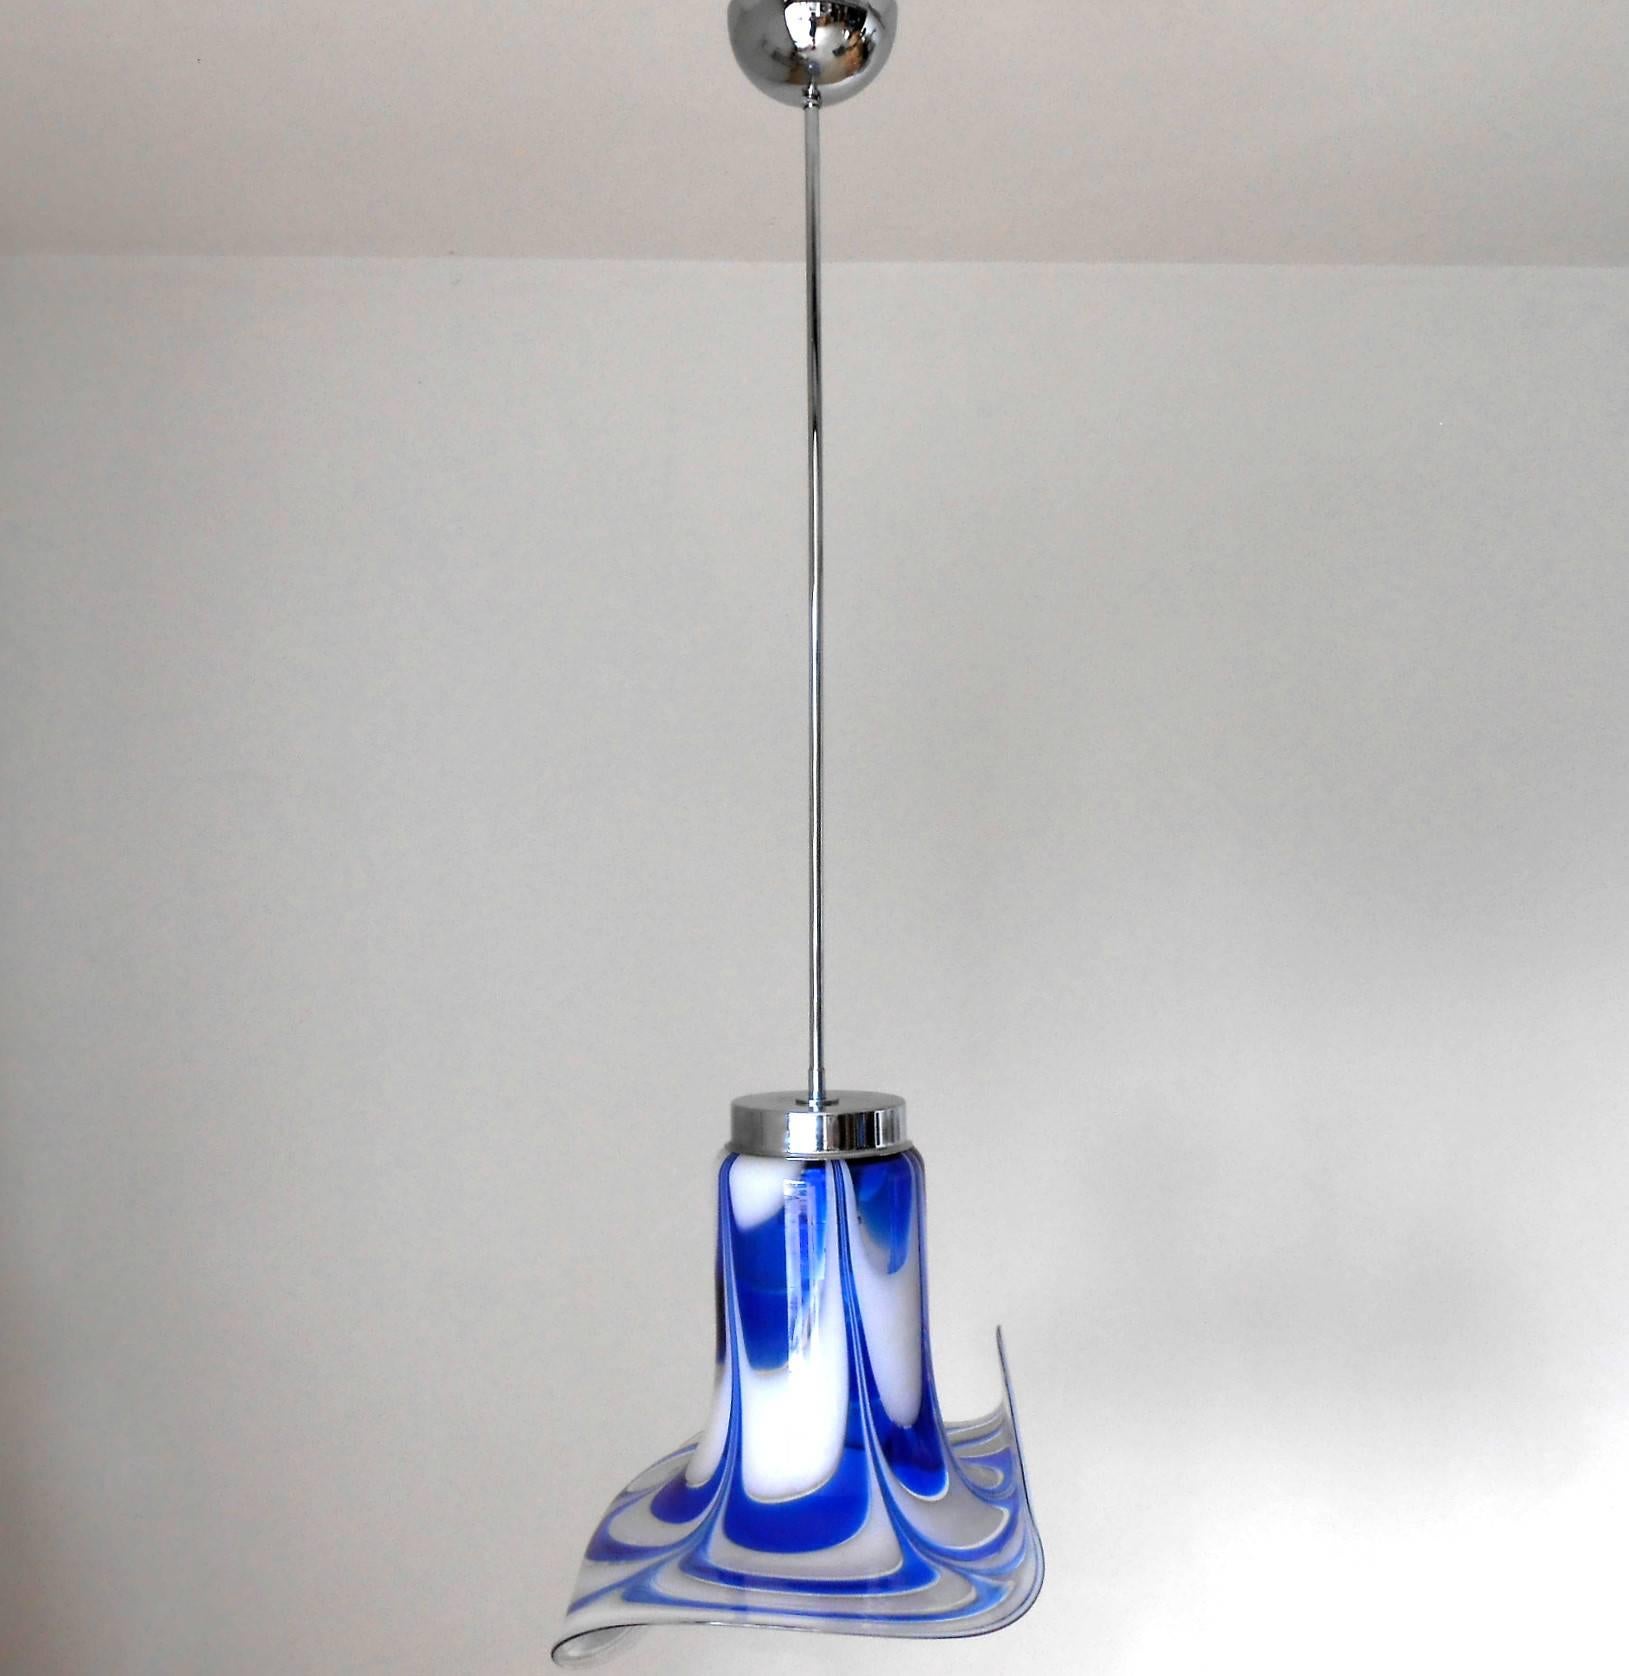 Italian vintage pendant with blue and white Murano glass blown into a blend mosaic and shaped curves / Designed by Vistosi circa 1960’s / Made in Italy
1 light / E26 or E27 type / max 60W
Diameter: 19 inches / Height: 44 inches including rod and